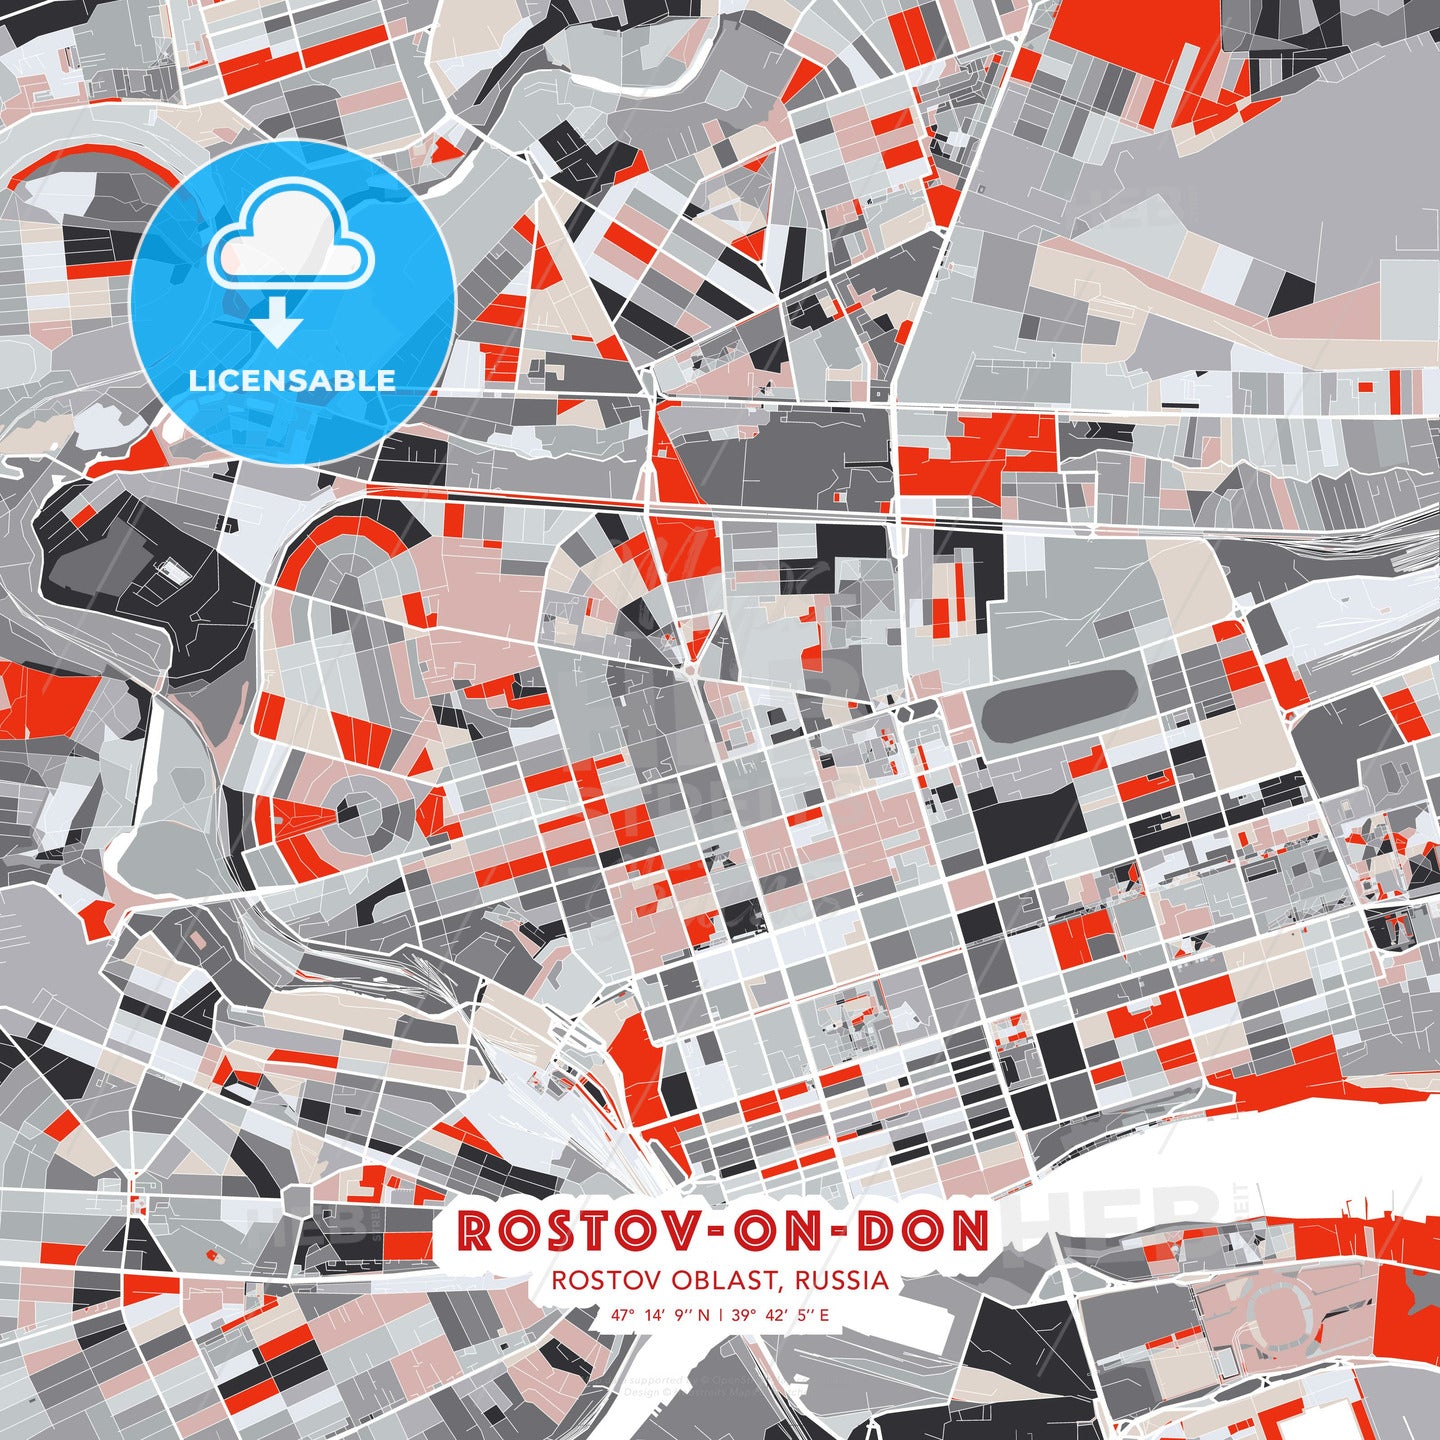 Rostov-on-Don, Rostov Oblast, Russia, modern map - HEBSTREITS Sketches